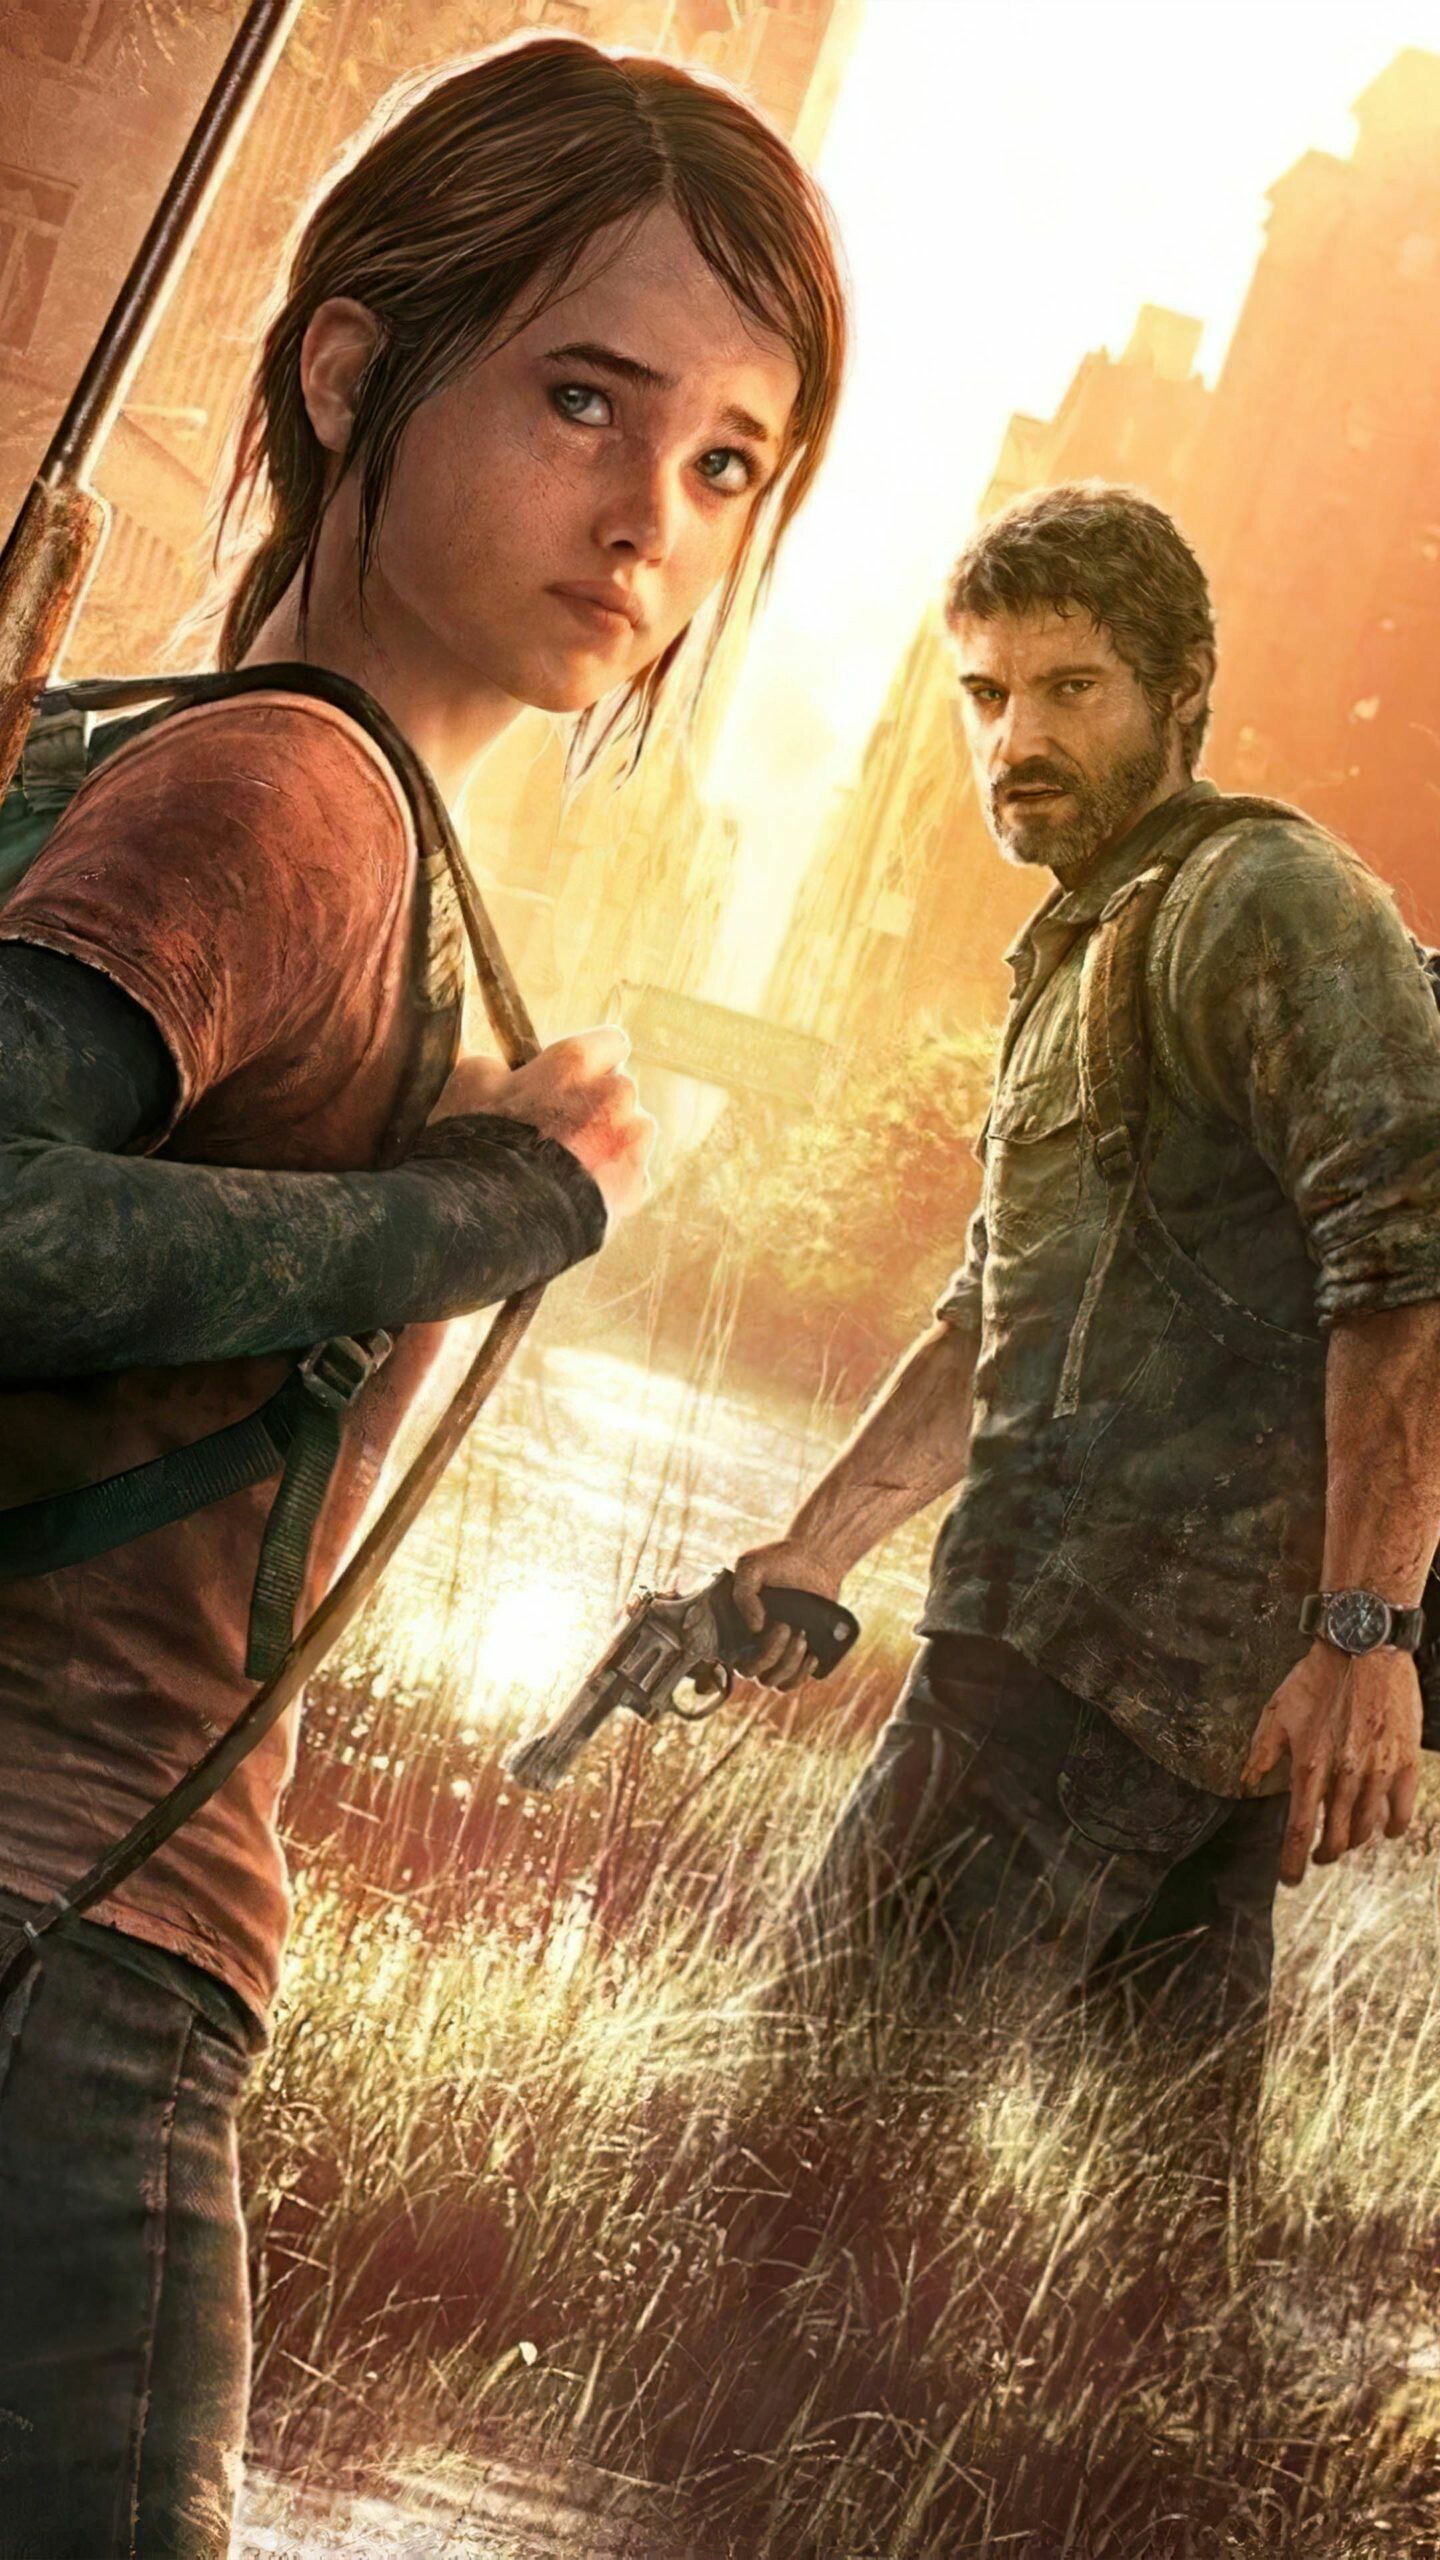 The Last of Us: The player is able to scavenge limited-use melee weapons, such as pipes and baseball bats, and throw bottles and bricks to distract, stun, or attack enemies. 1440x2560 HD Wallpaper.